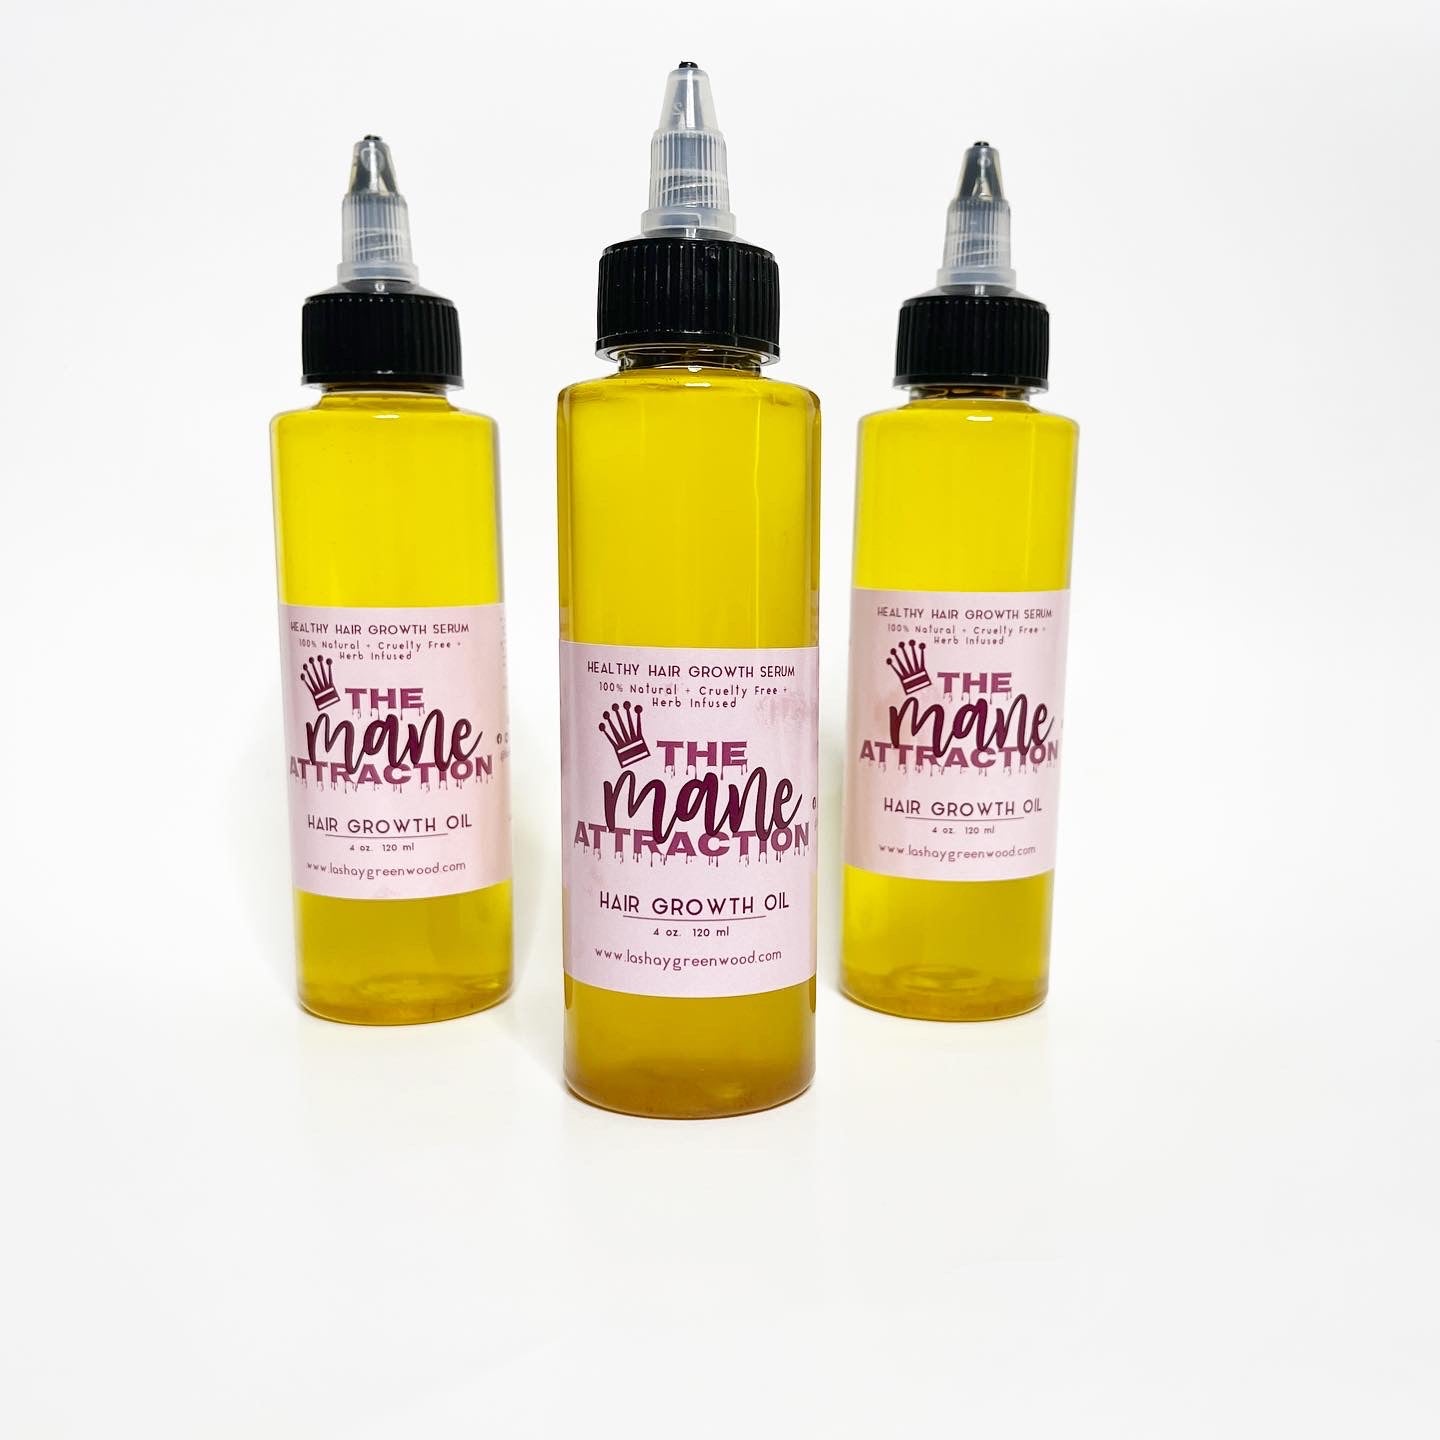 Stimulating Hair Growth Oil 3-In-1 Bundle - The Mane Attraction